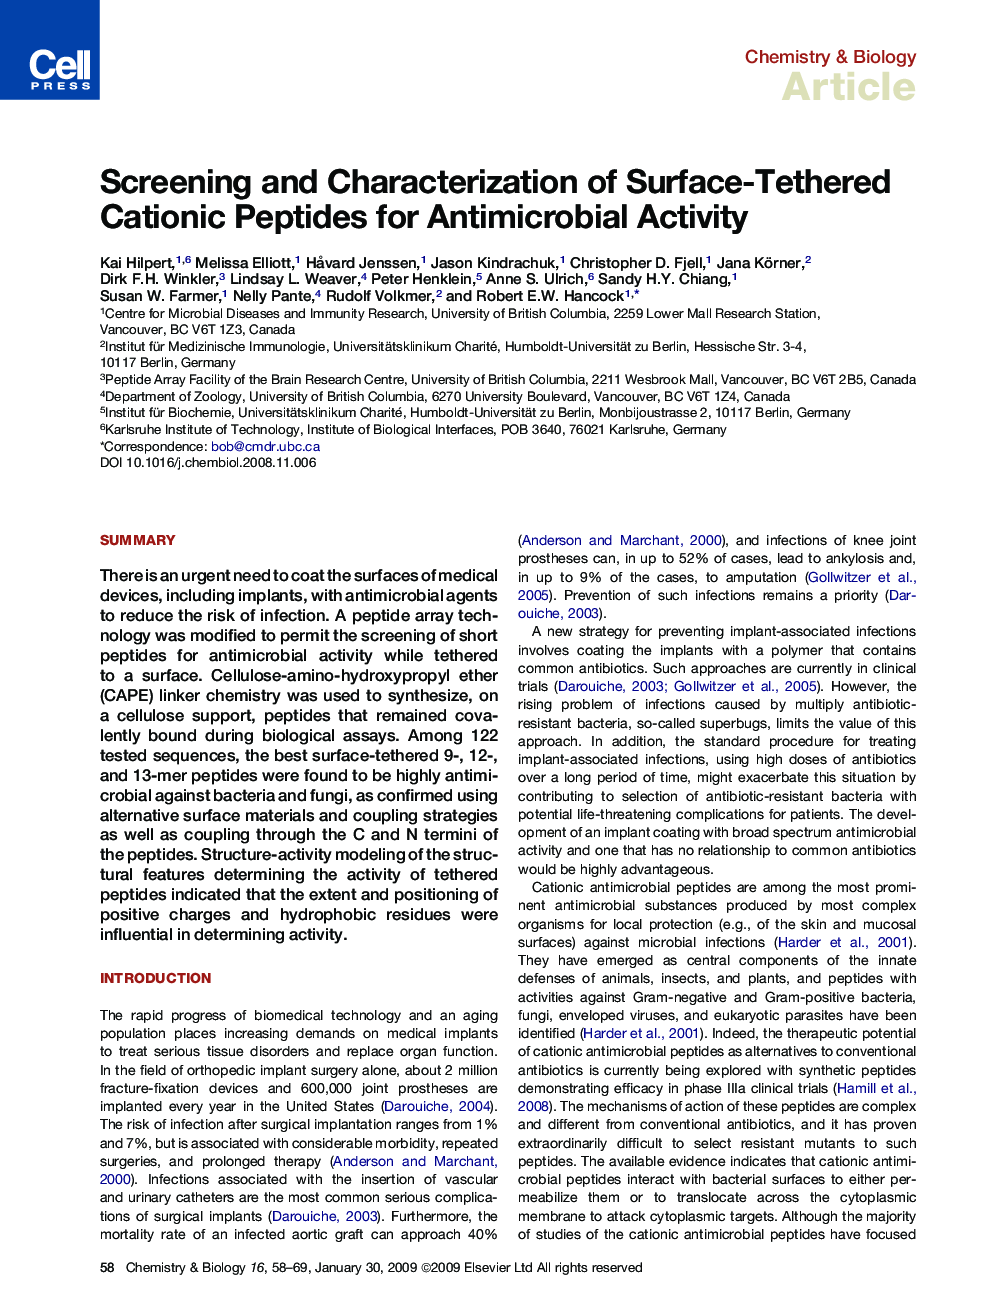 Screening and Characterization of Surface-Tethered Cationic Peptides for Antimicrobial Activity